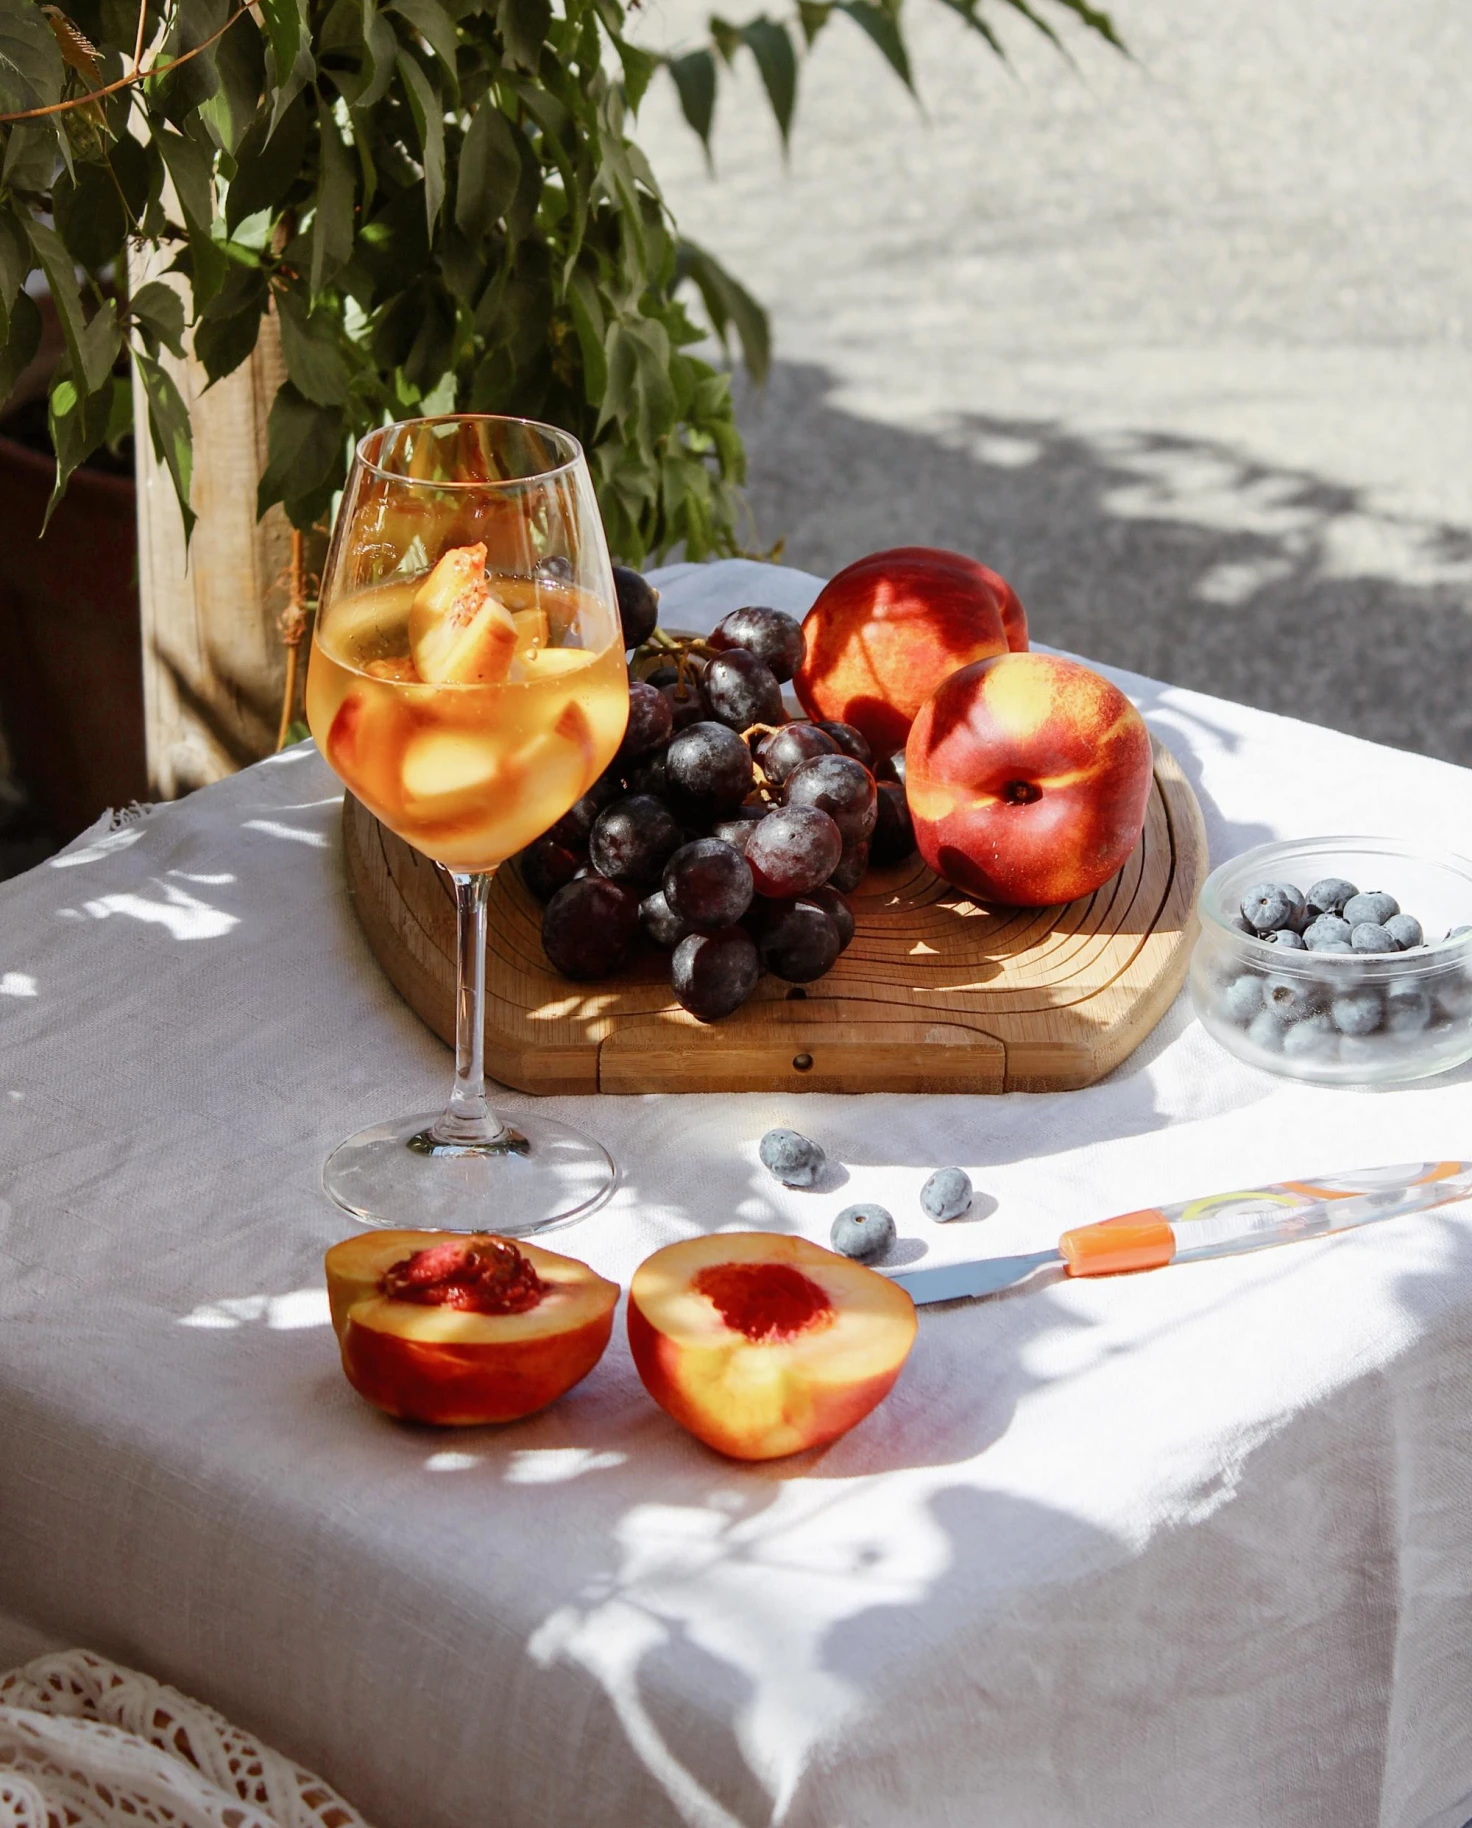 a glass of white wine with a plate of grapes and peaches resting on a white tablecloth